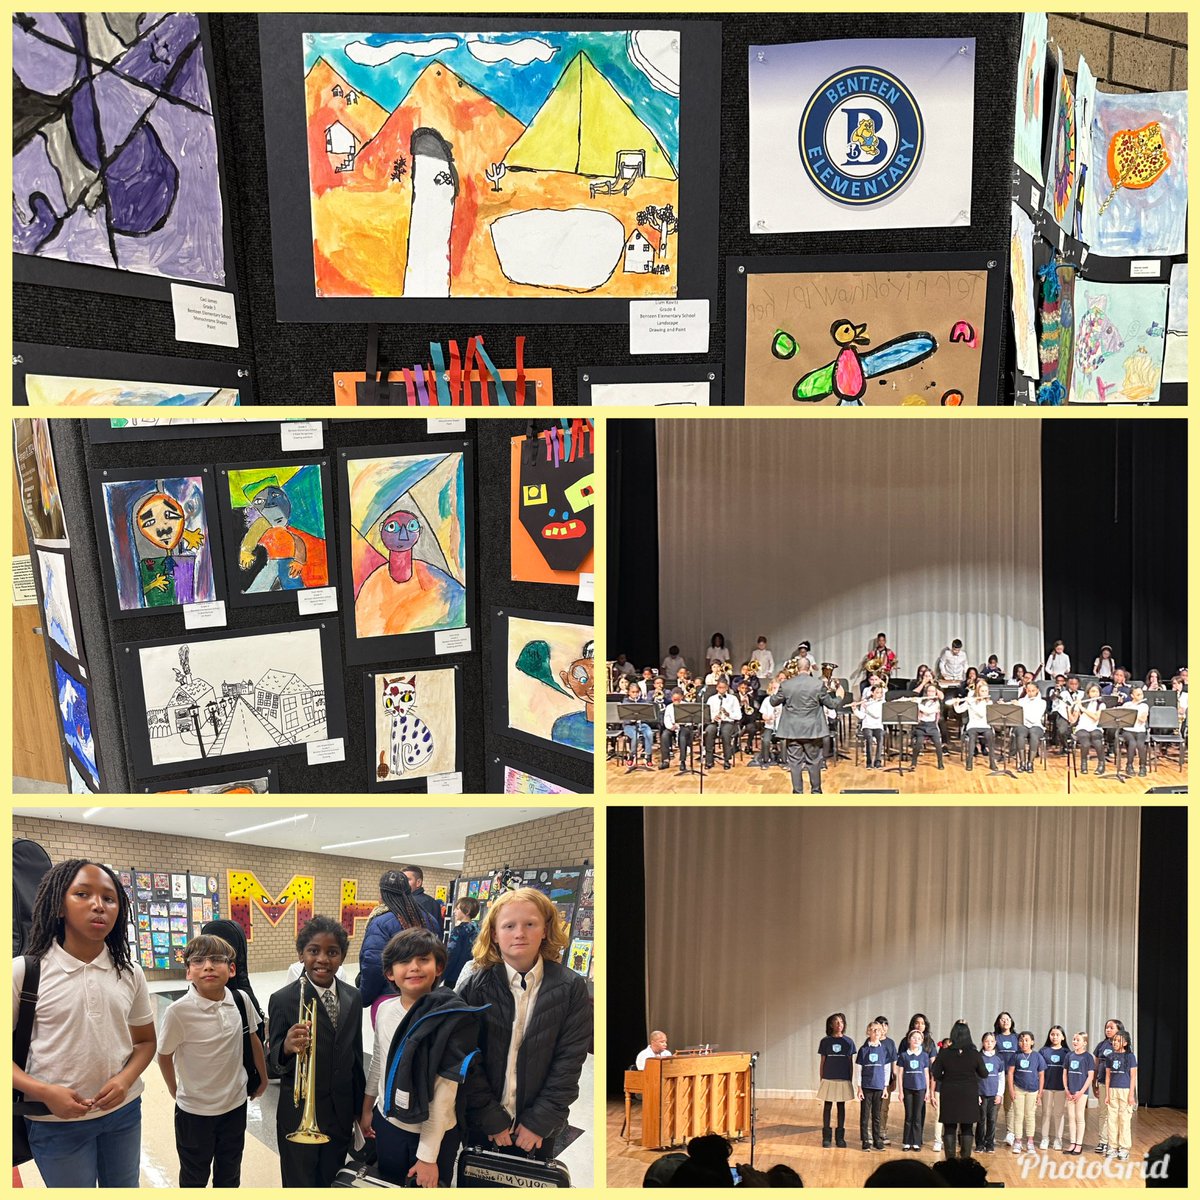 So about last night…@APSBenteen musicians and artists performed and shared their talented BRILLIANCE at the Jackson Cluster Arts Night! #MJJAllDay Kudos to @Falconersings, @kmurray_apsband & #MsBairdCampbell for leading your students to greatness! @lexology00